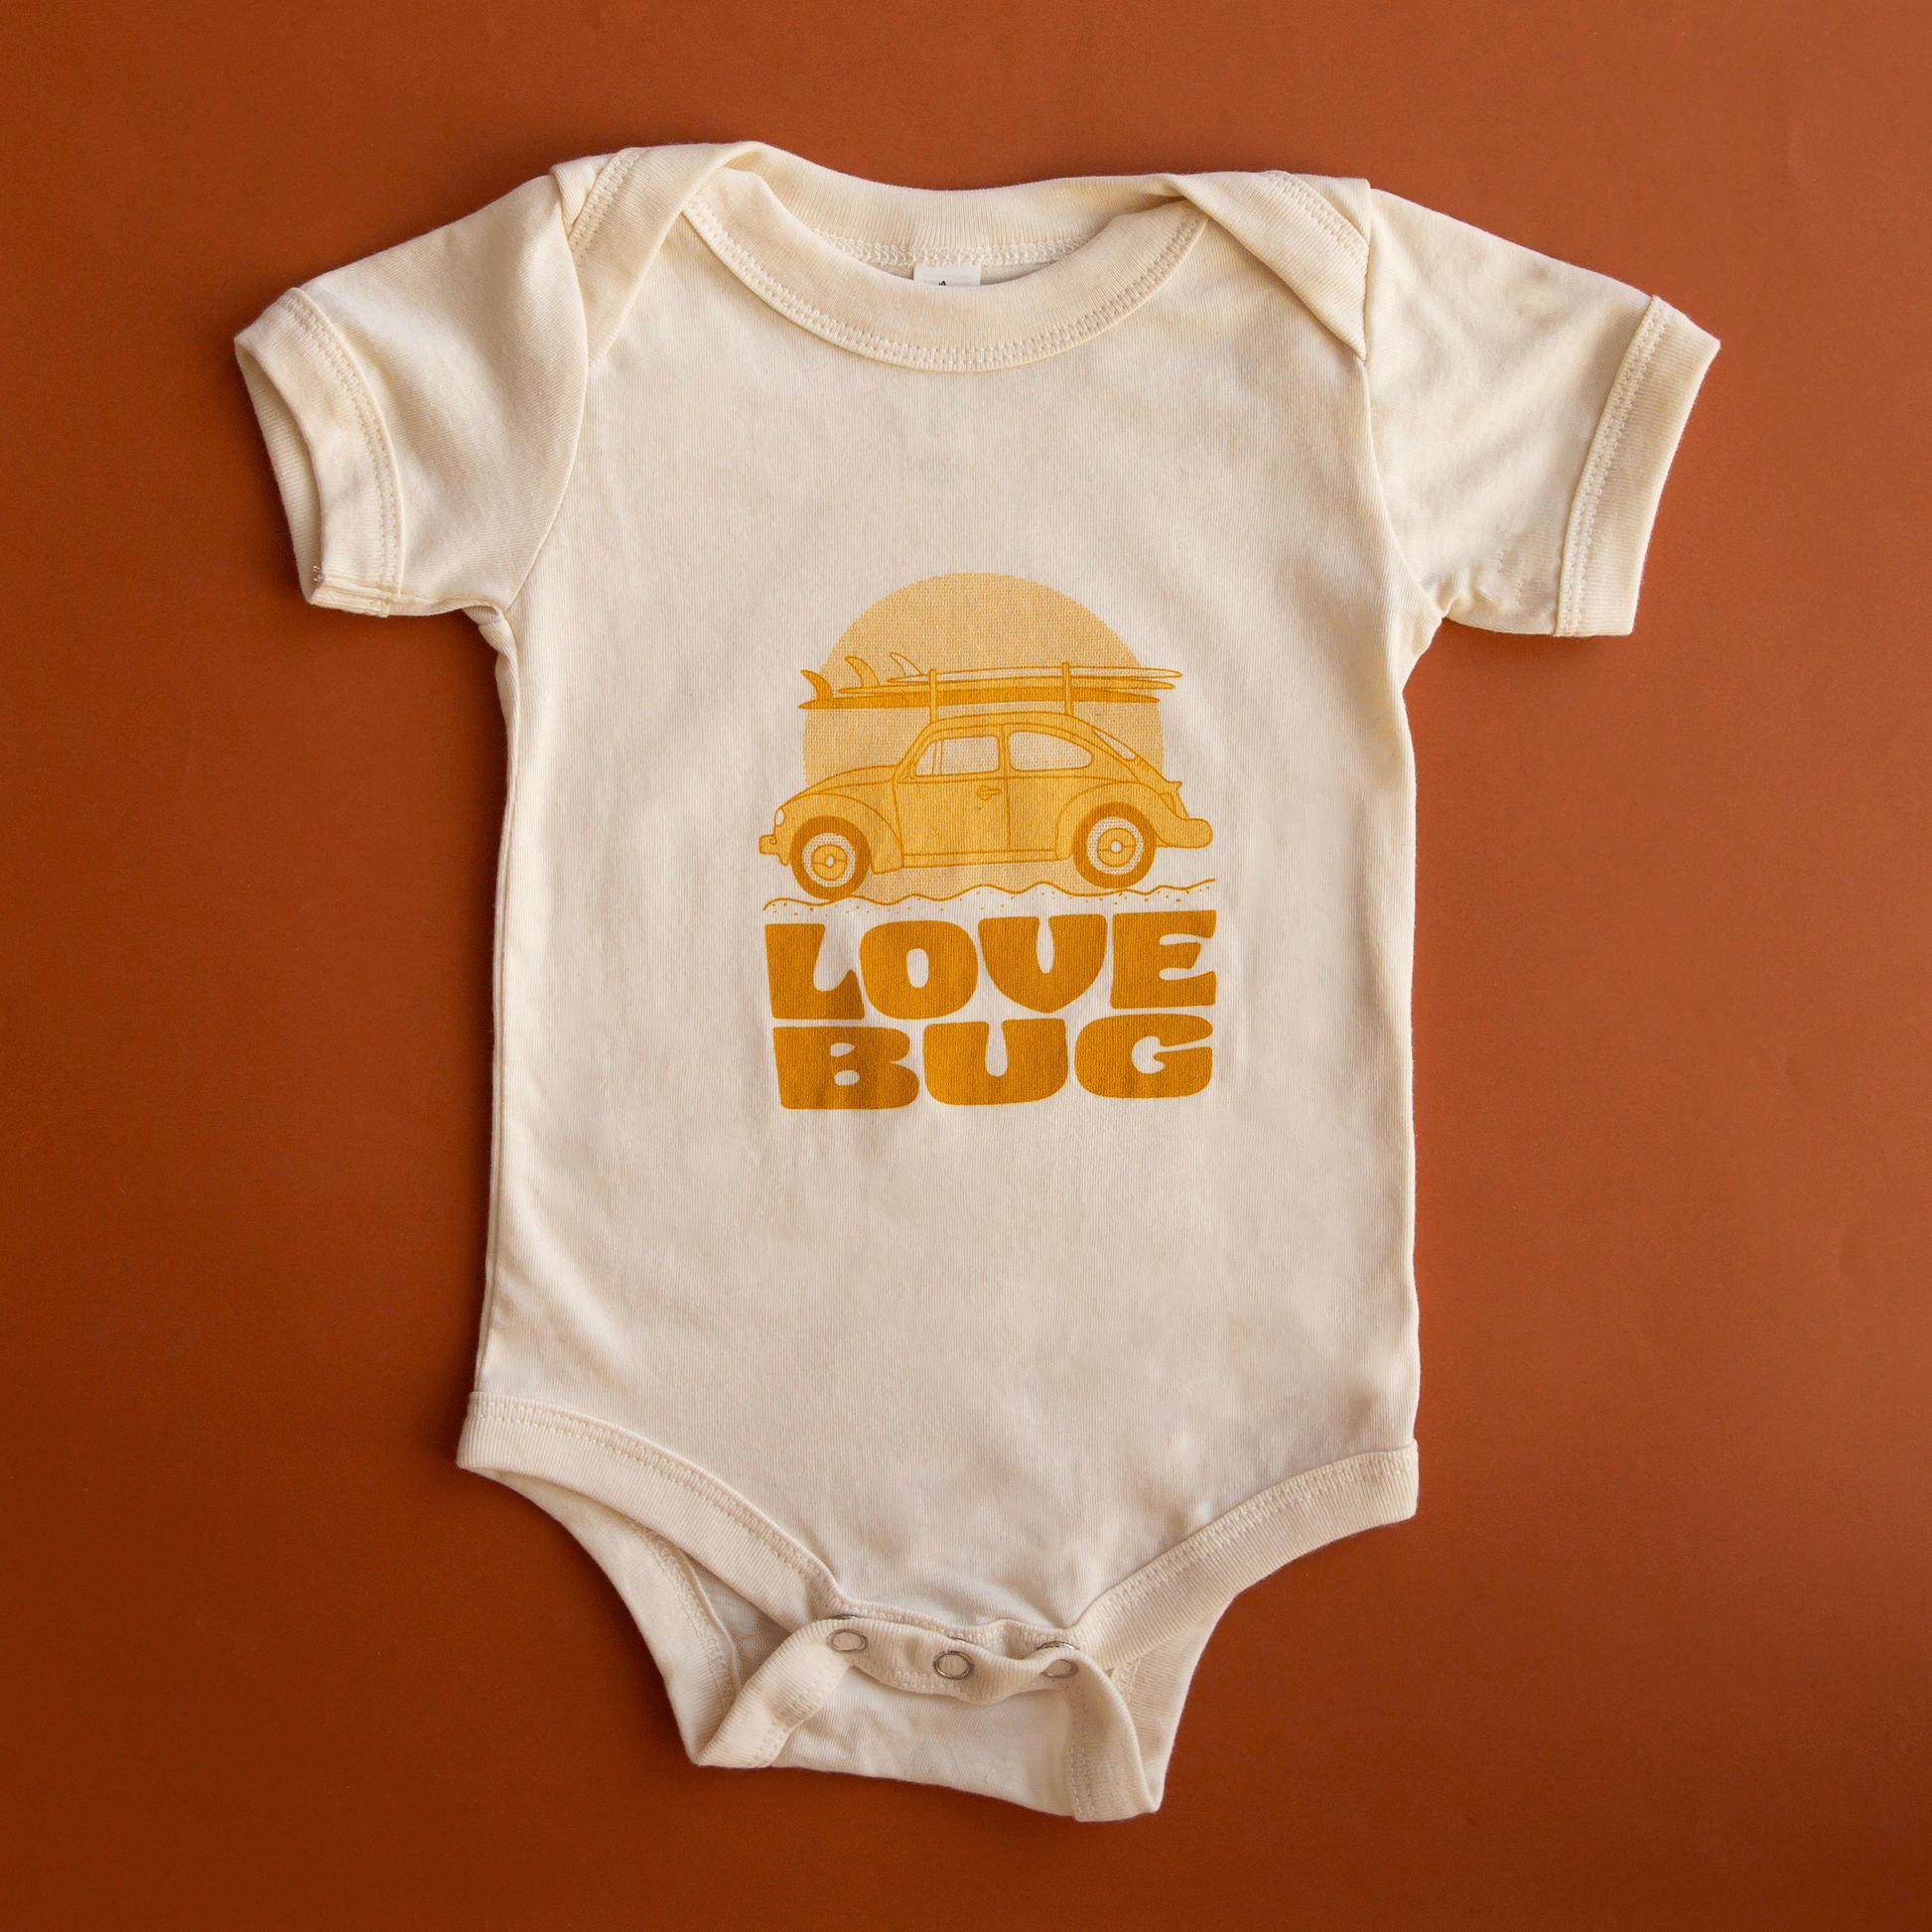 On a burnt orange background is an ivory onesie with a yellow orange VW bug graphic with surfboards on top along with text below that reads, "Love Bug".